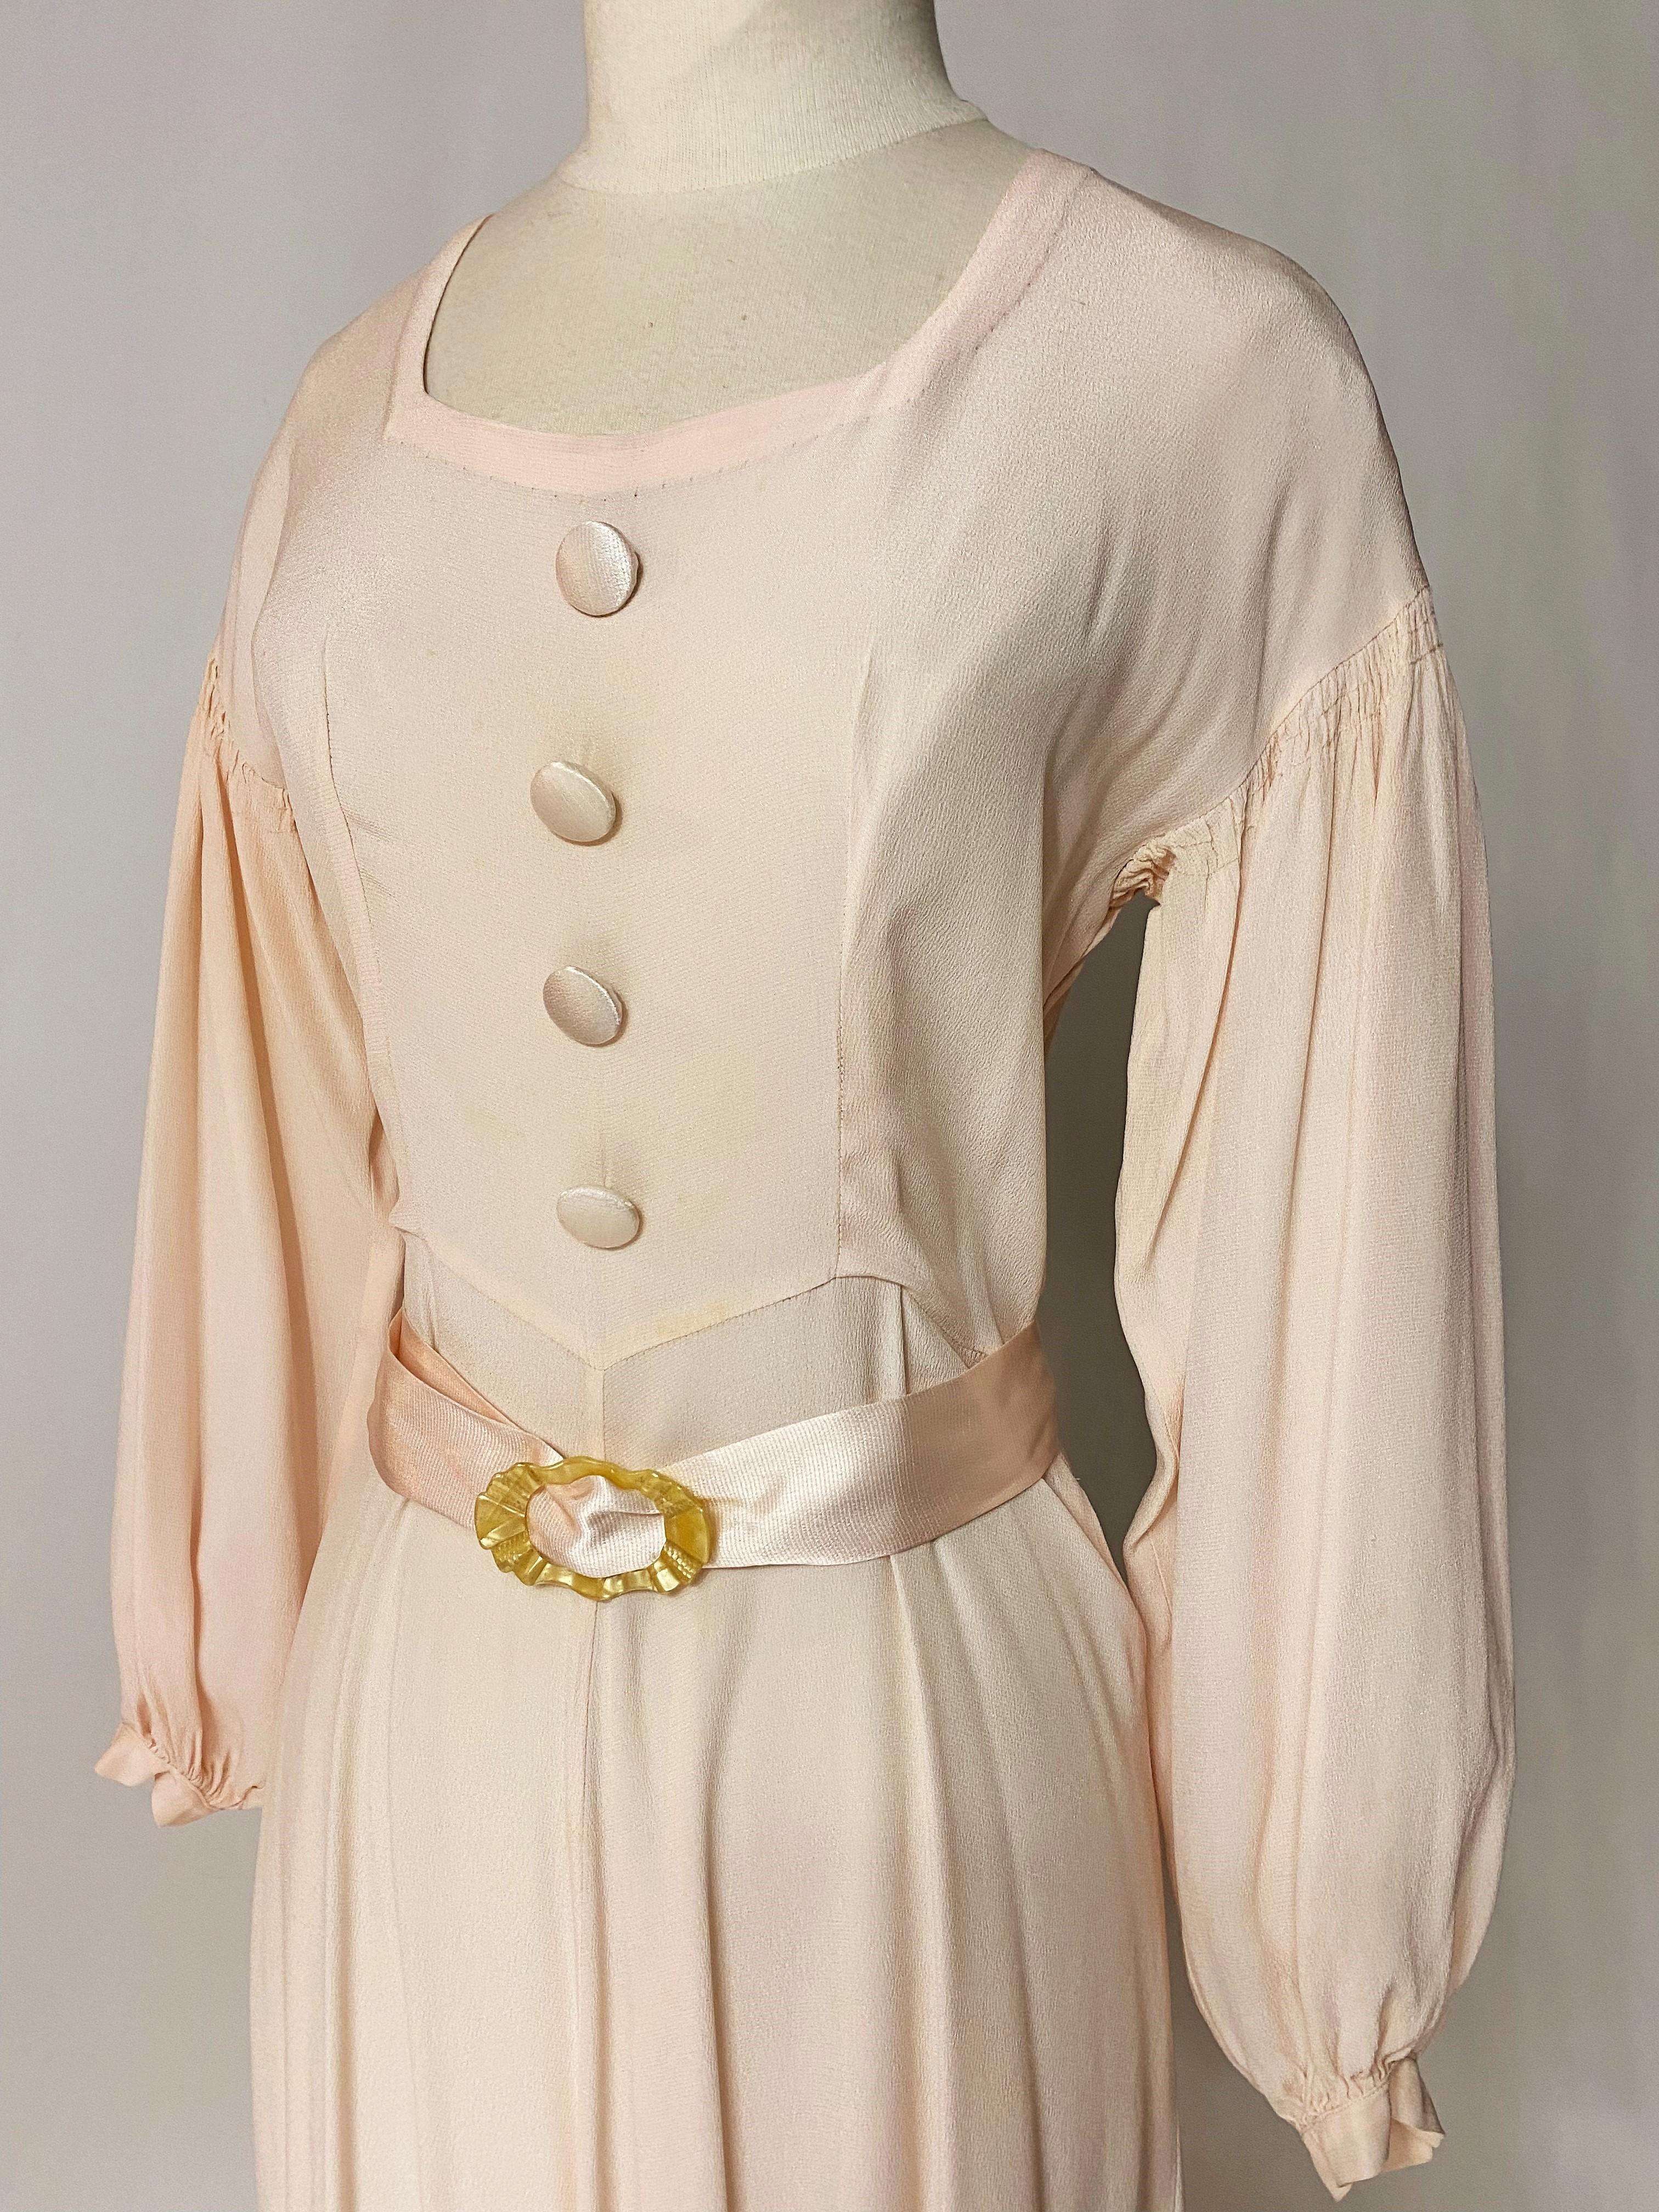 A French Powder Pink Crepe Satin Ceremonial Dress Circa 1940 For Sale 9